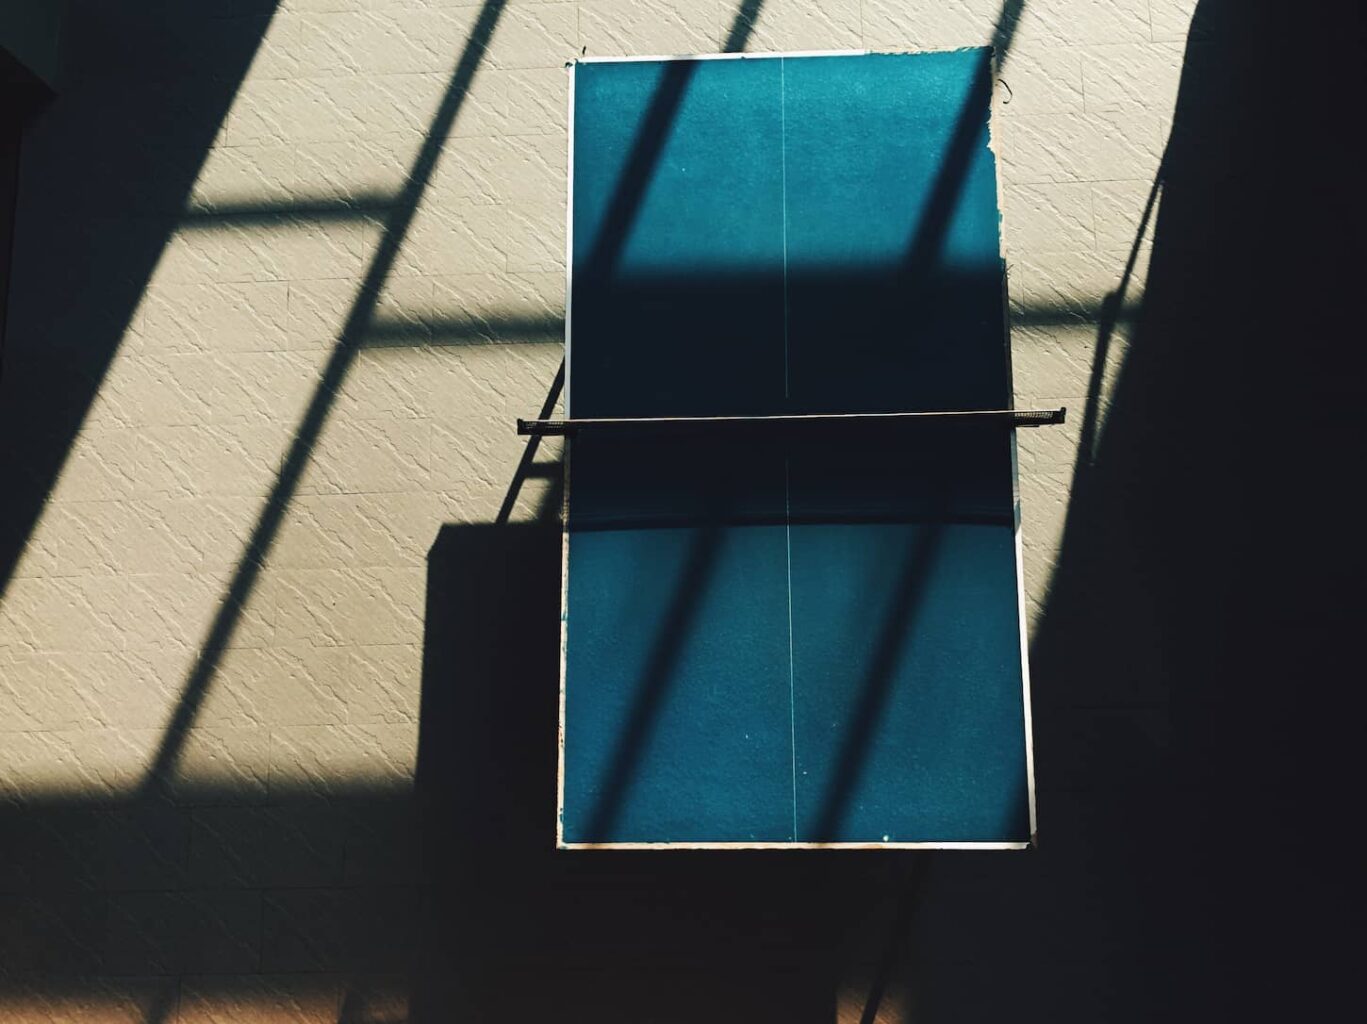 An image of a table tennis table in a room well lit with shadow from outside.